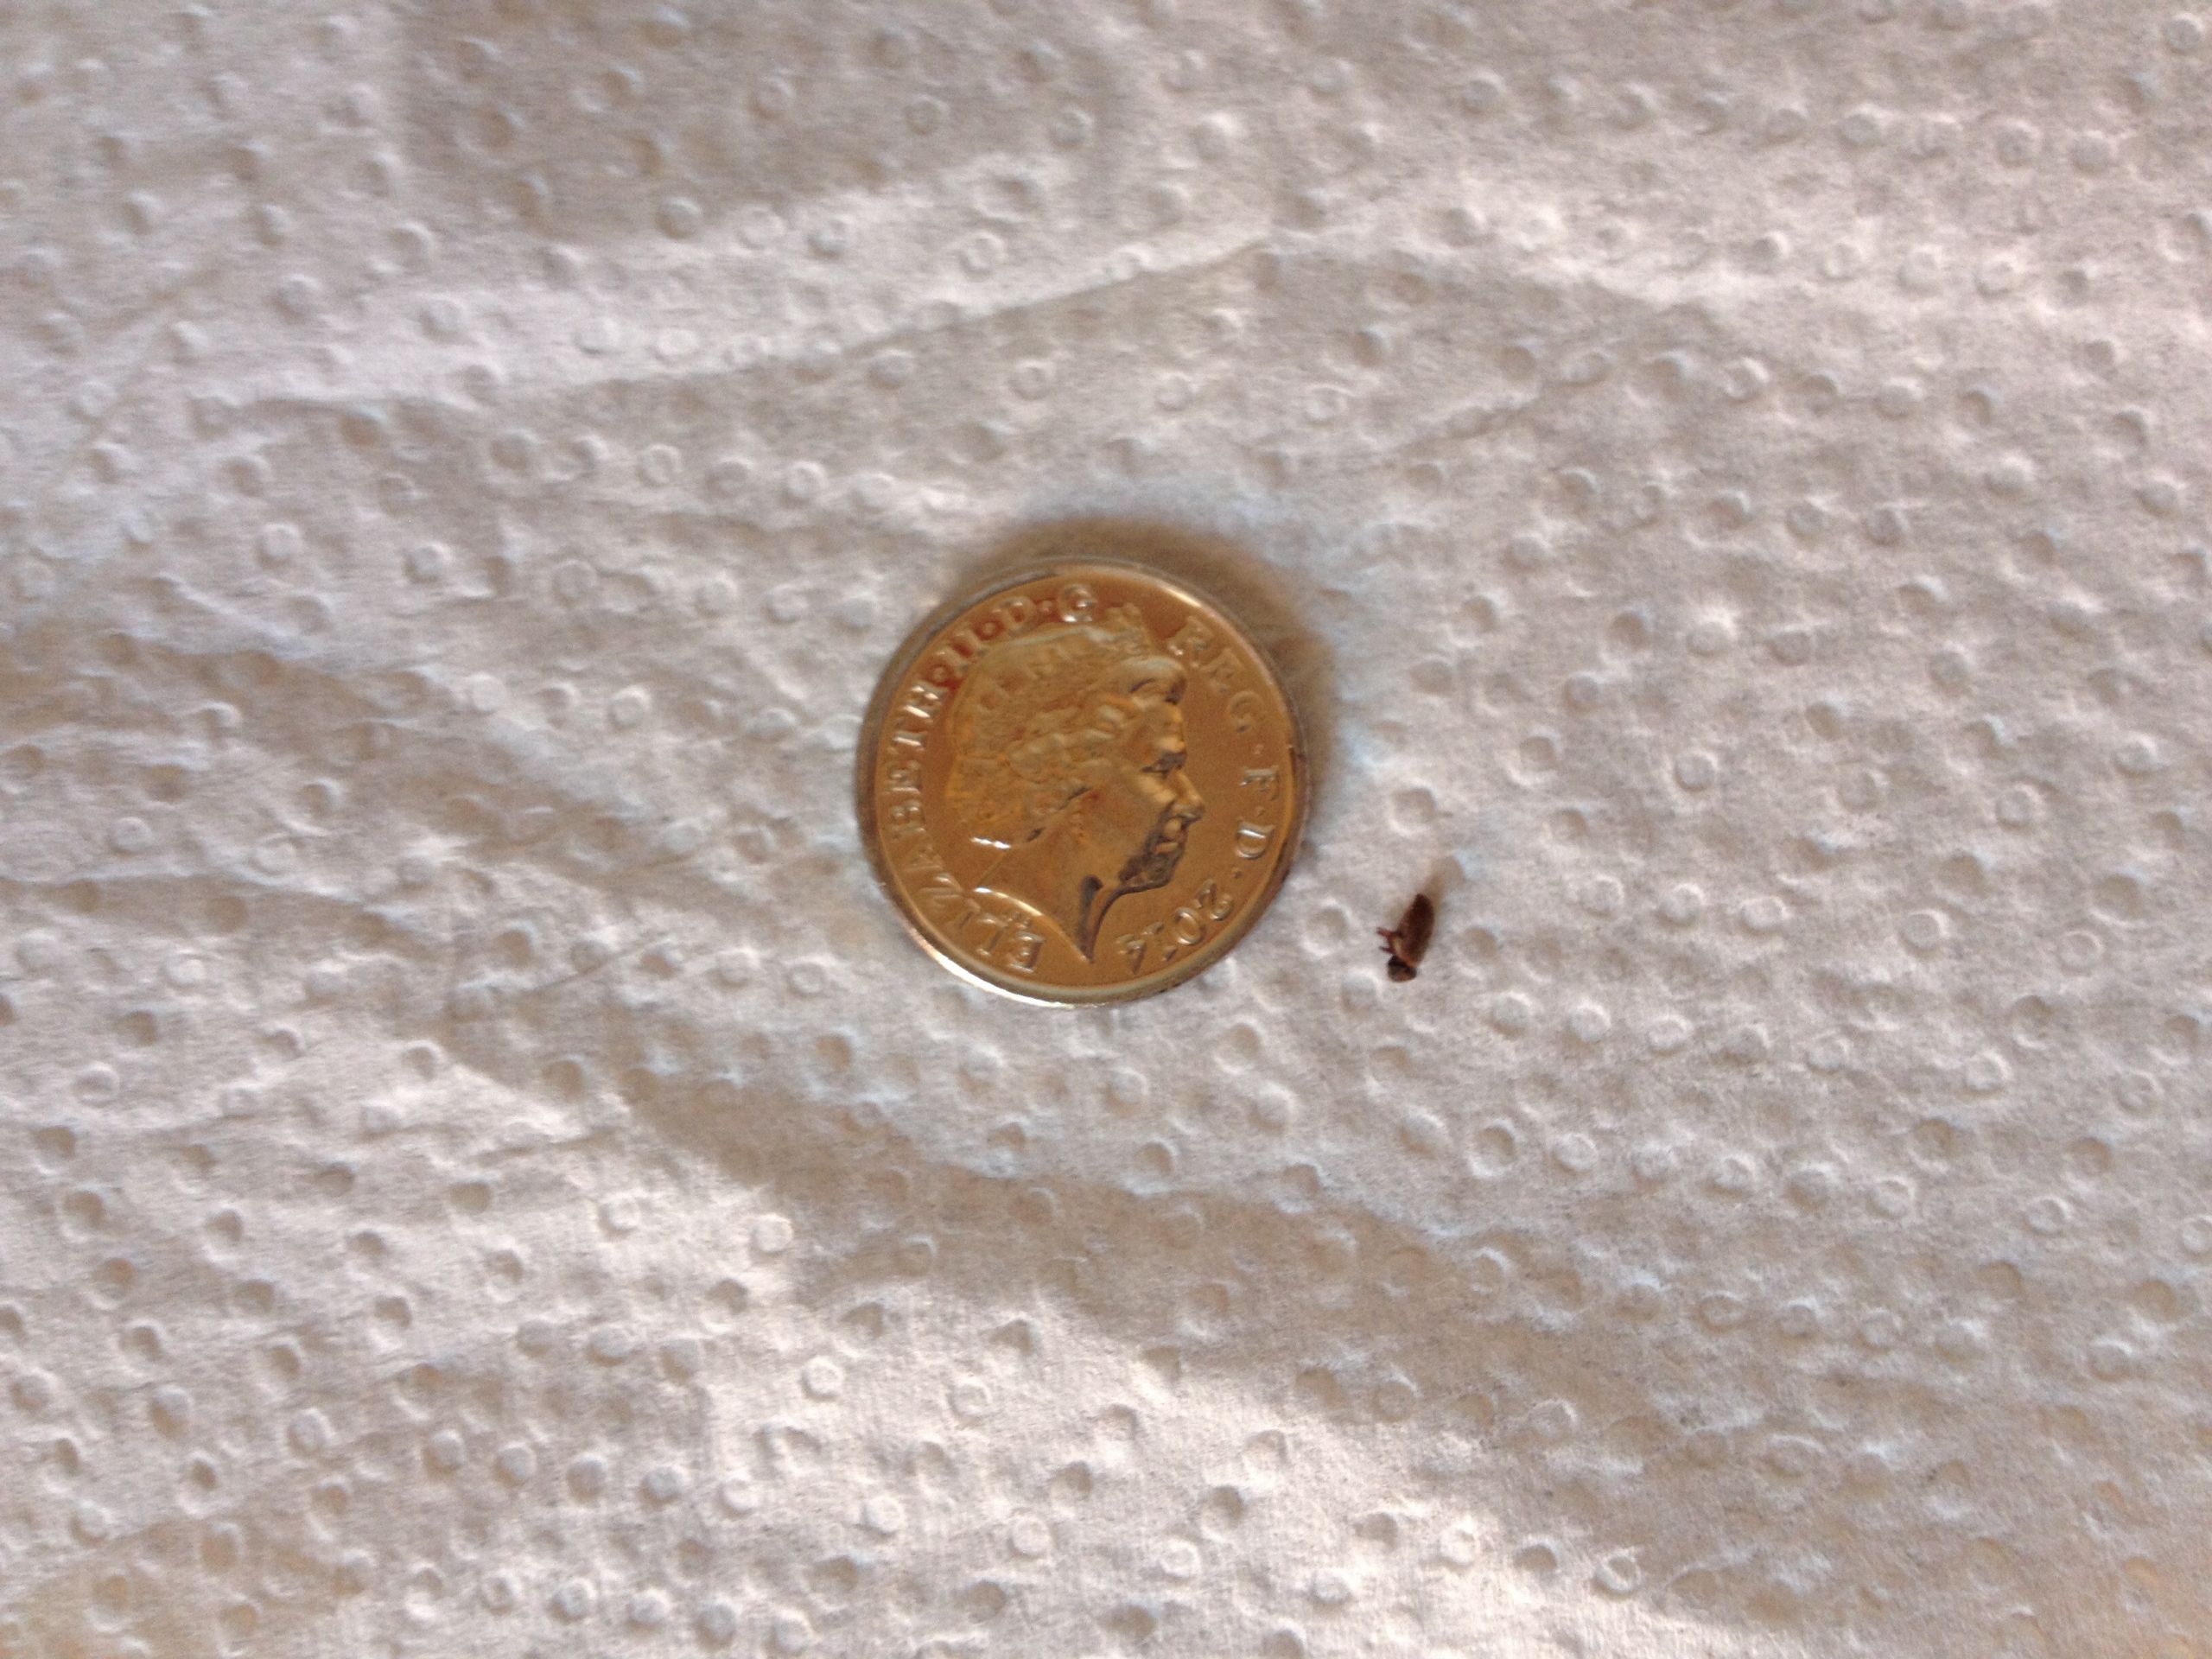 Small Bugs In Bathroom
 NaturePlus Please help me identify tiny black bugs found